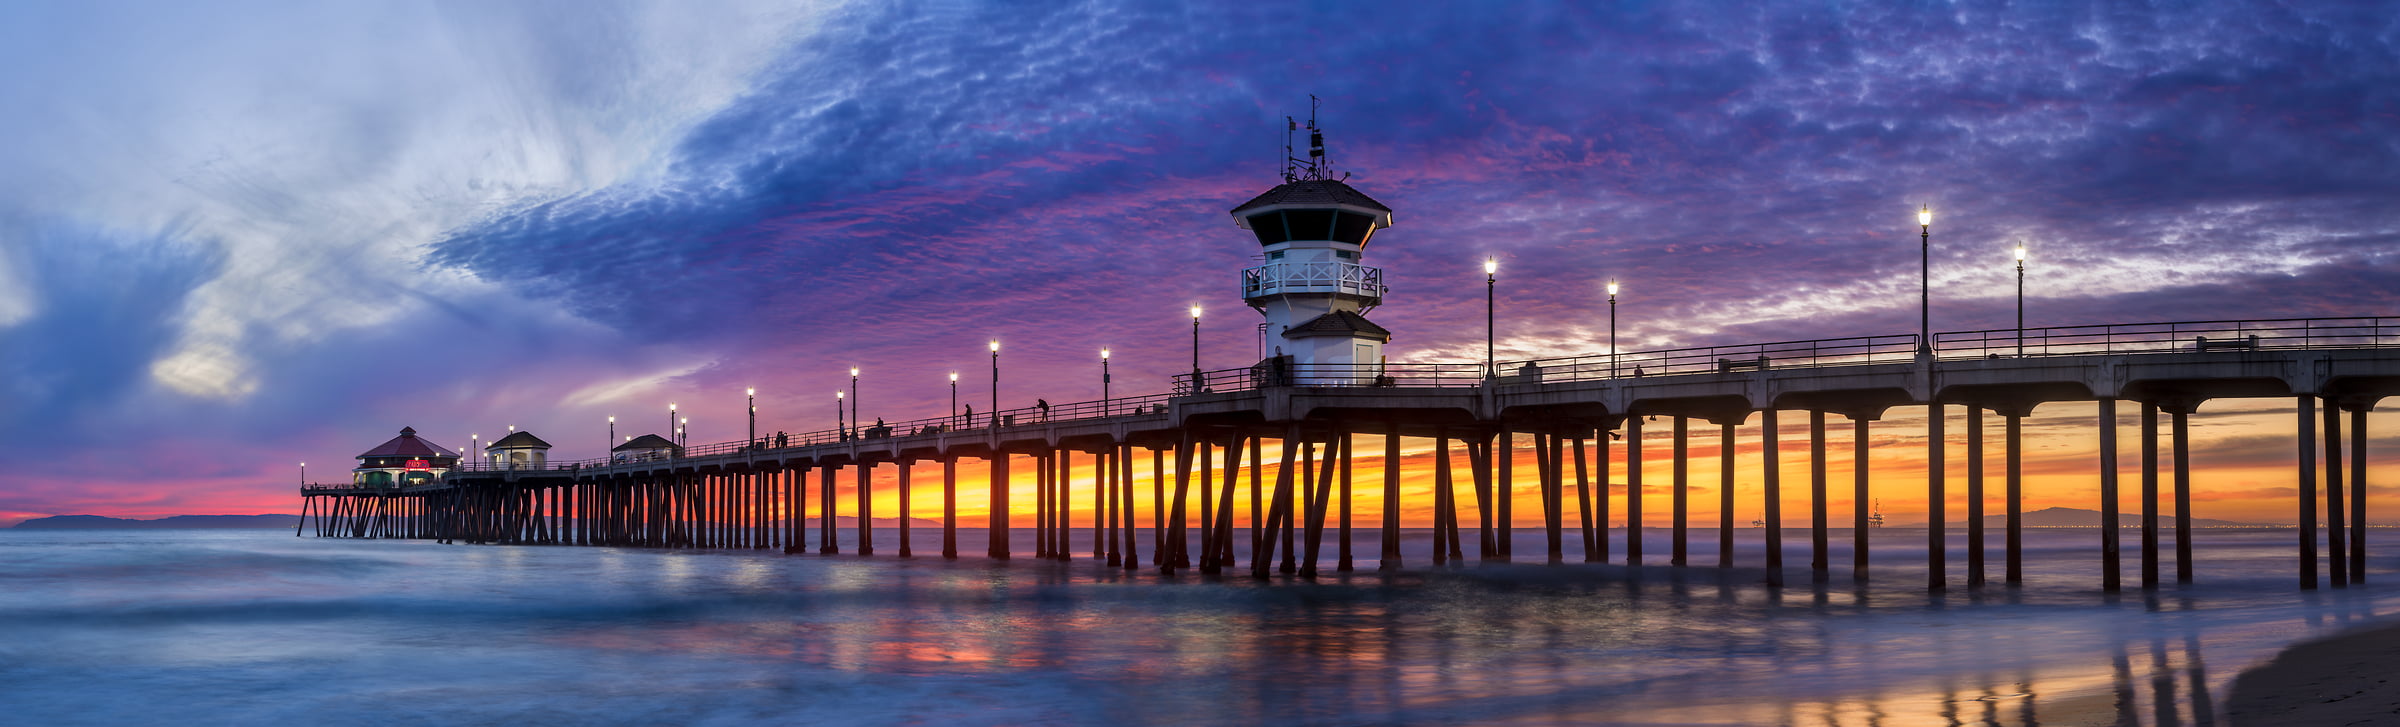 201 megapixels! A very high resolution, large-format VAST photo of a pier and the ocean at sunset; fine art photograph created by Jim Tarpo in Huntington Beach, California.